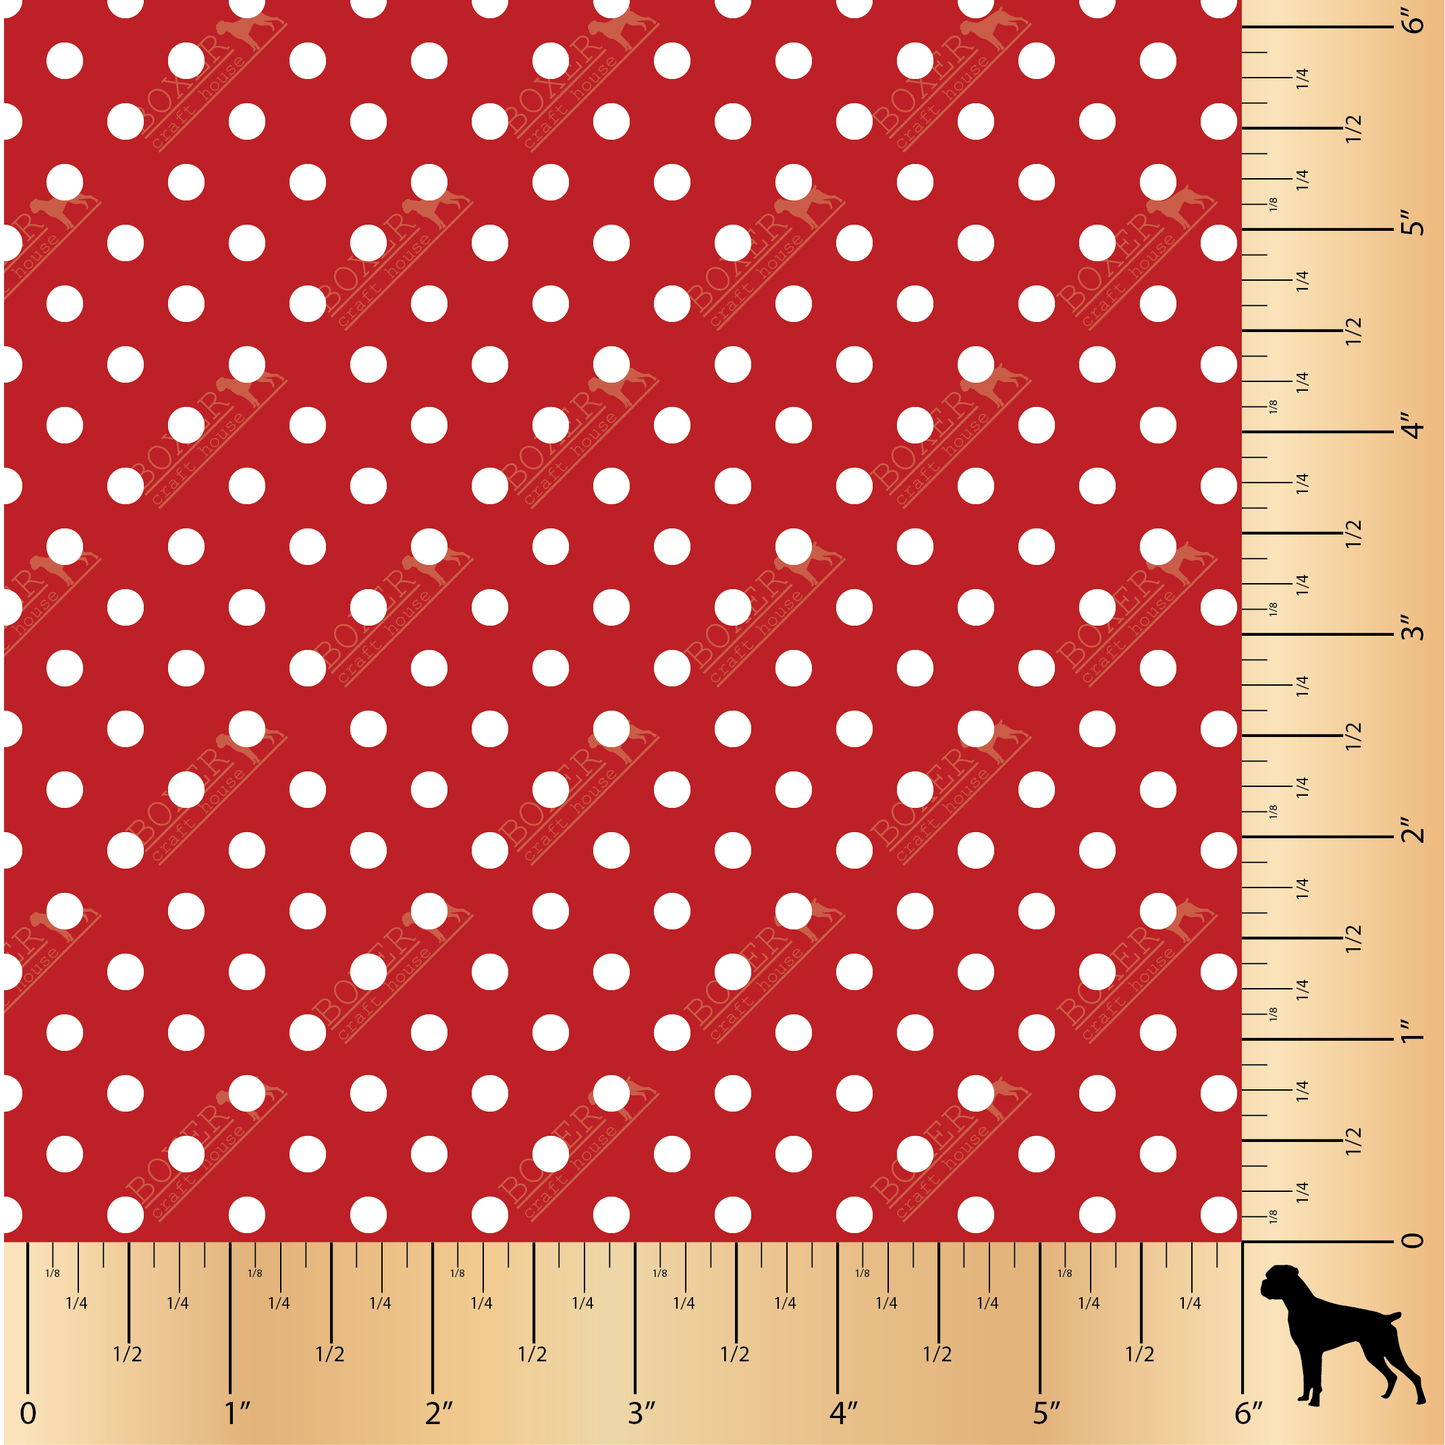 Dots 3/16" - Candy Apple Red